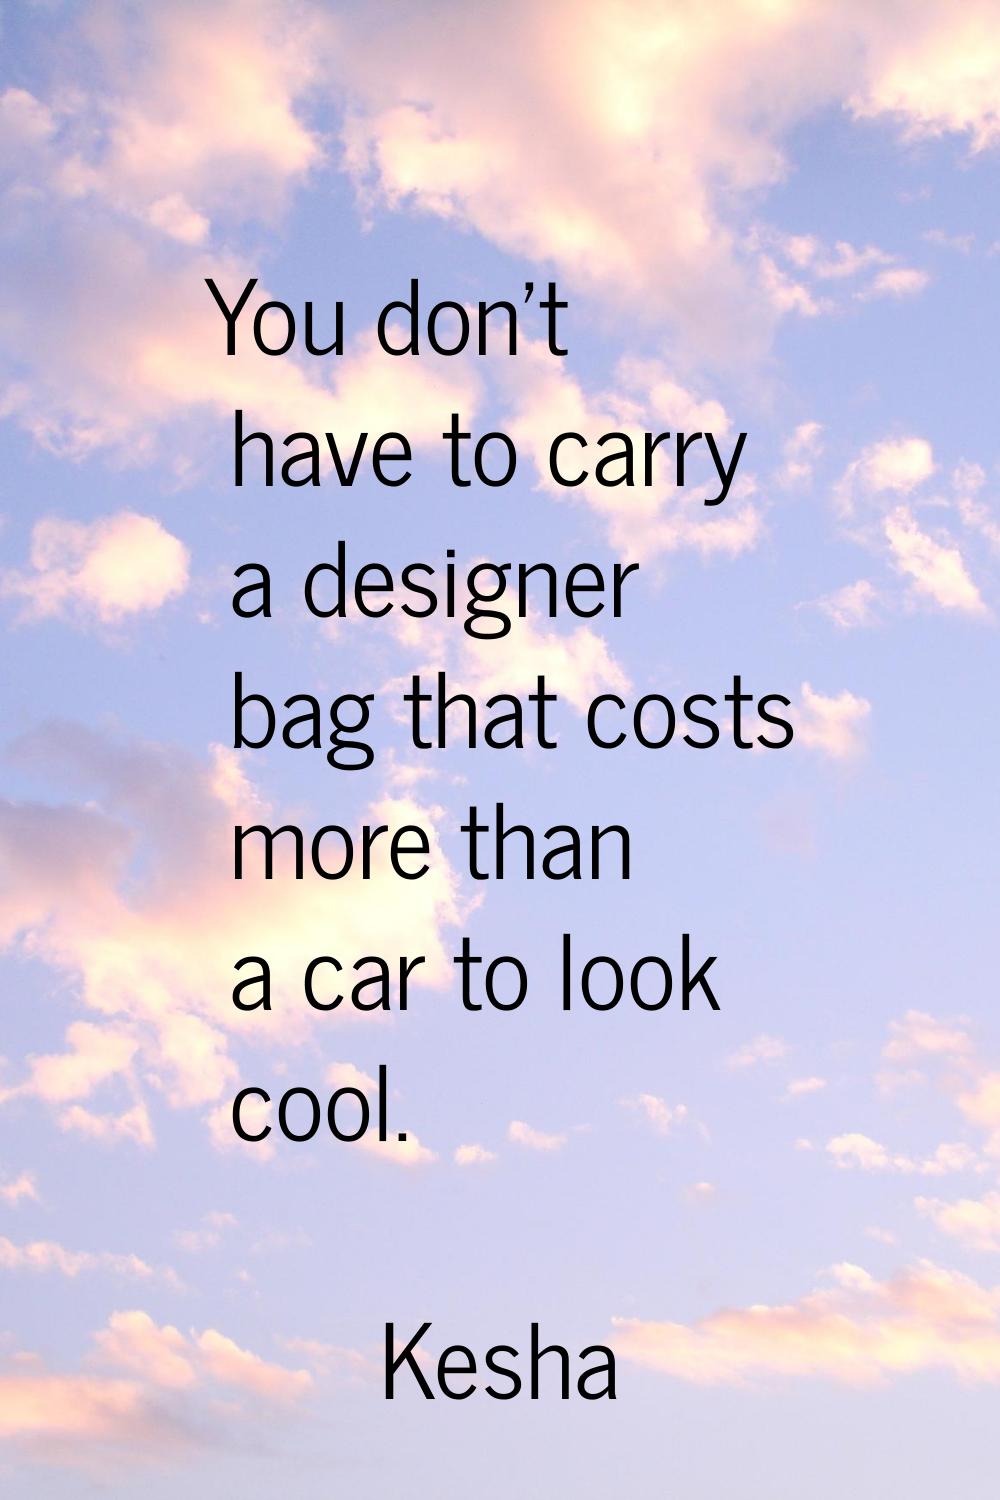 You don't have to carry a designer bag that costs more than a car to look cool.